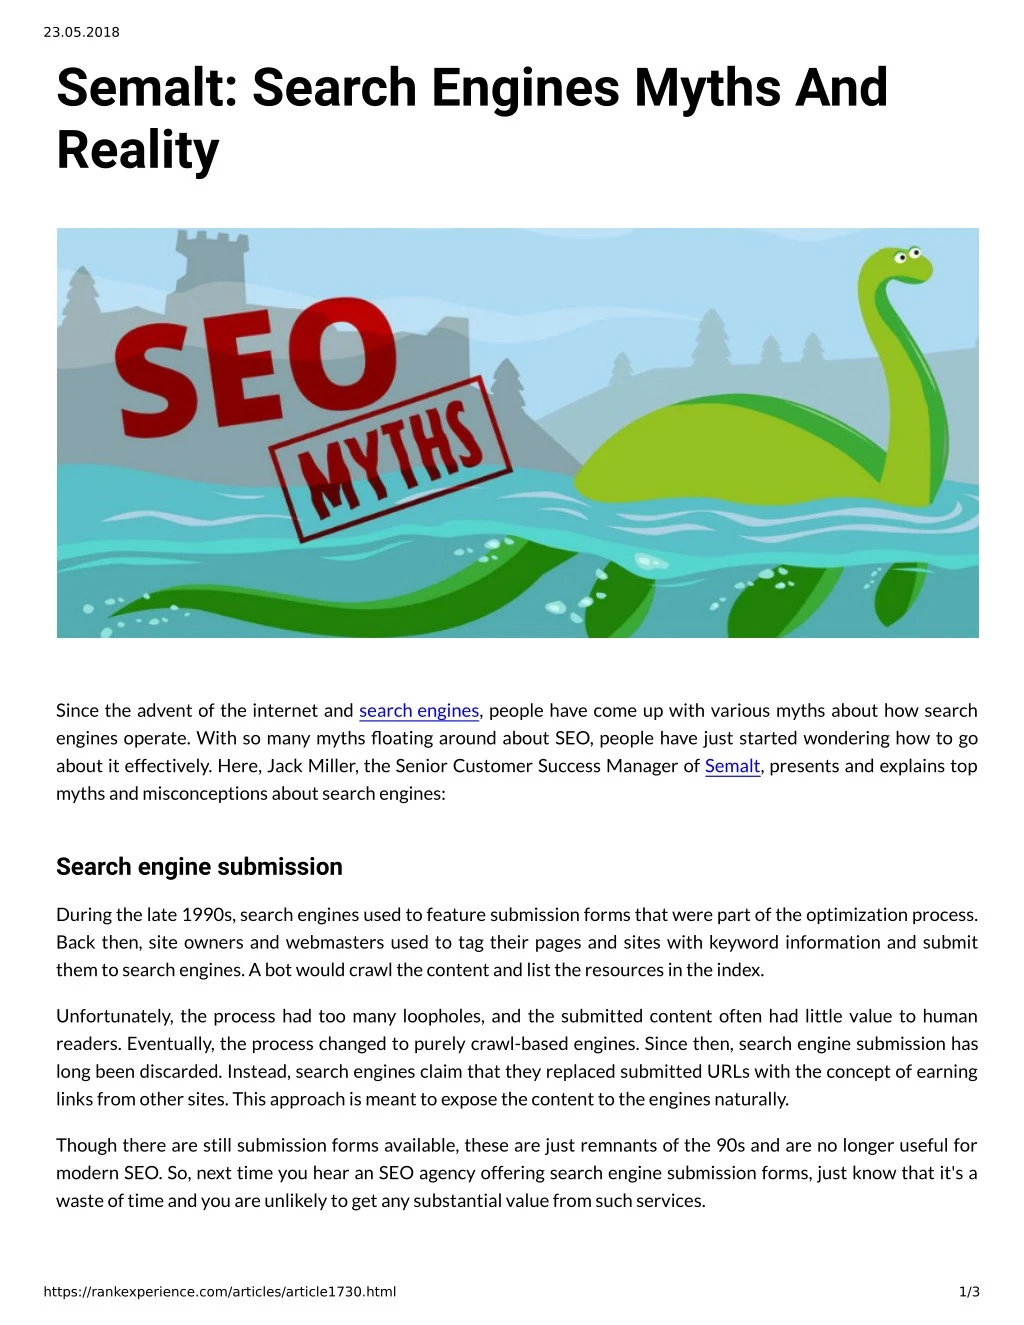 23 05 2018 semalt search engines myths and reality